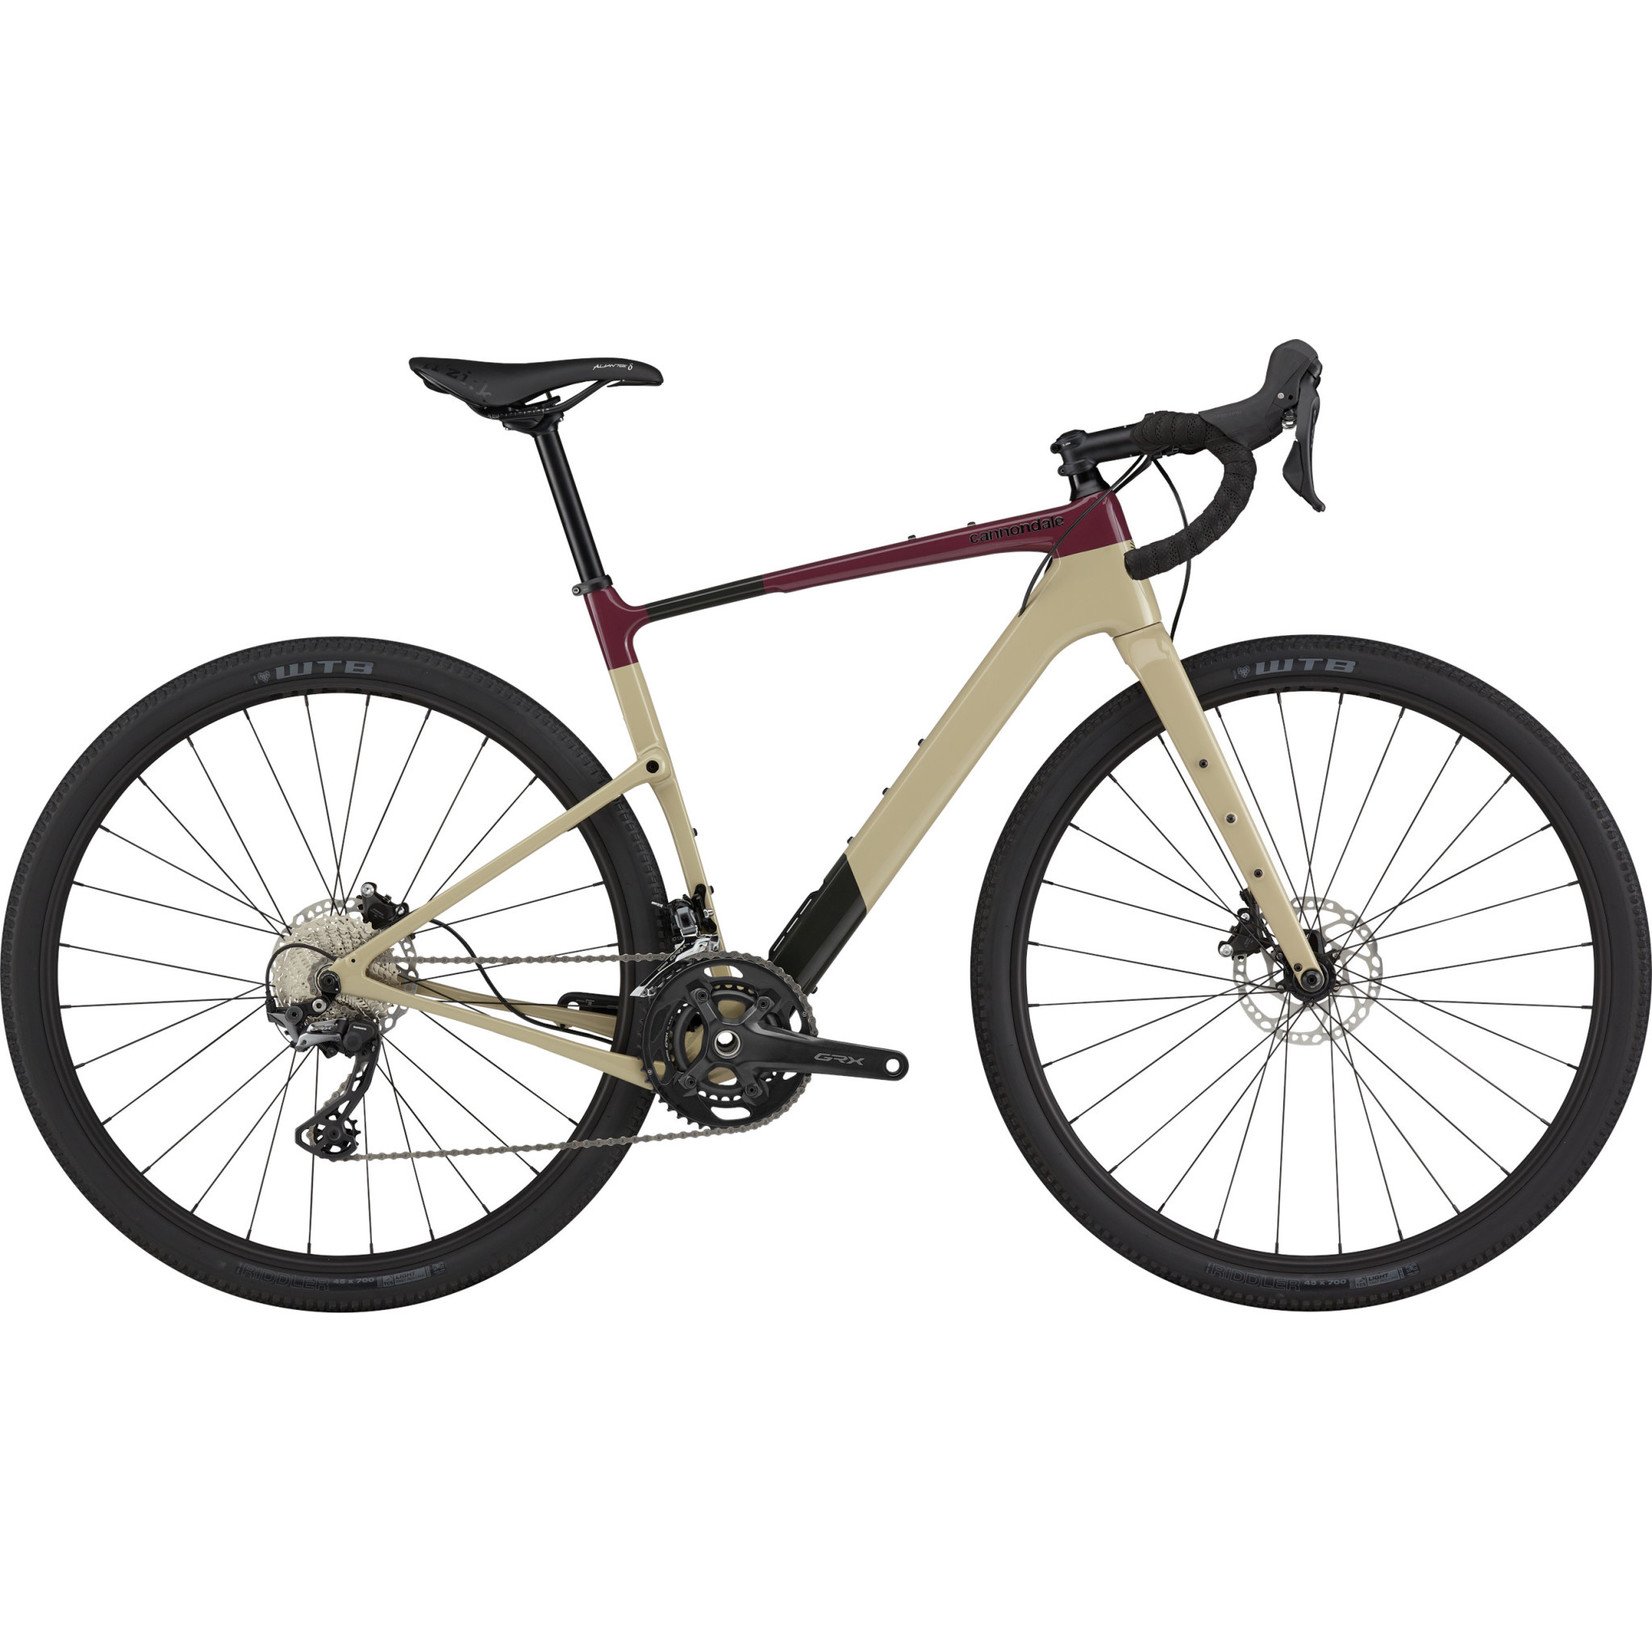 Cannondale Cannondale Topstone Crb 3 QSD MD